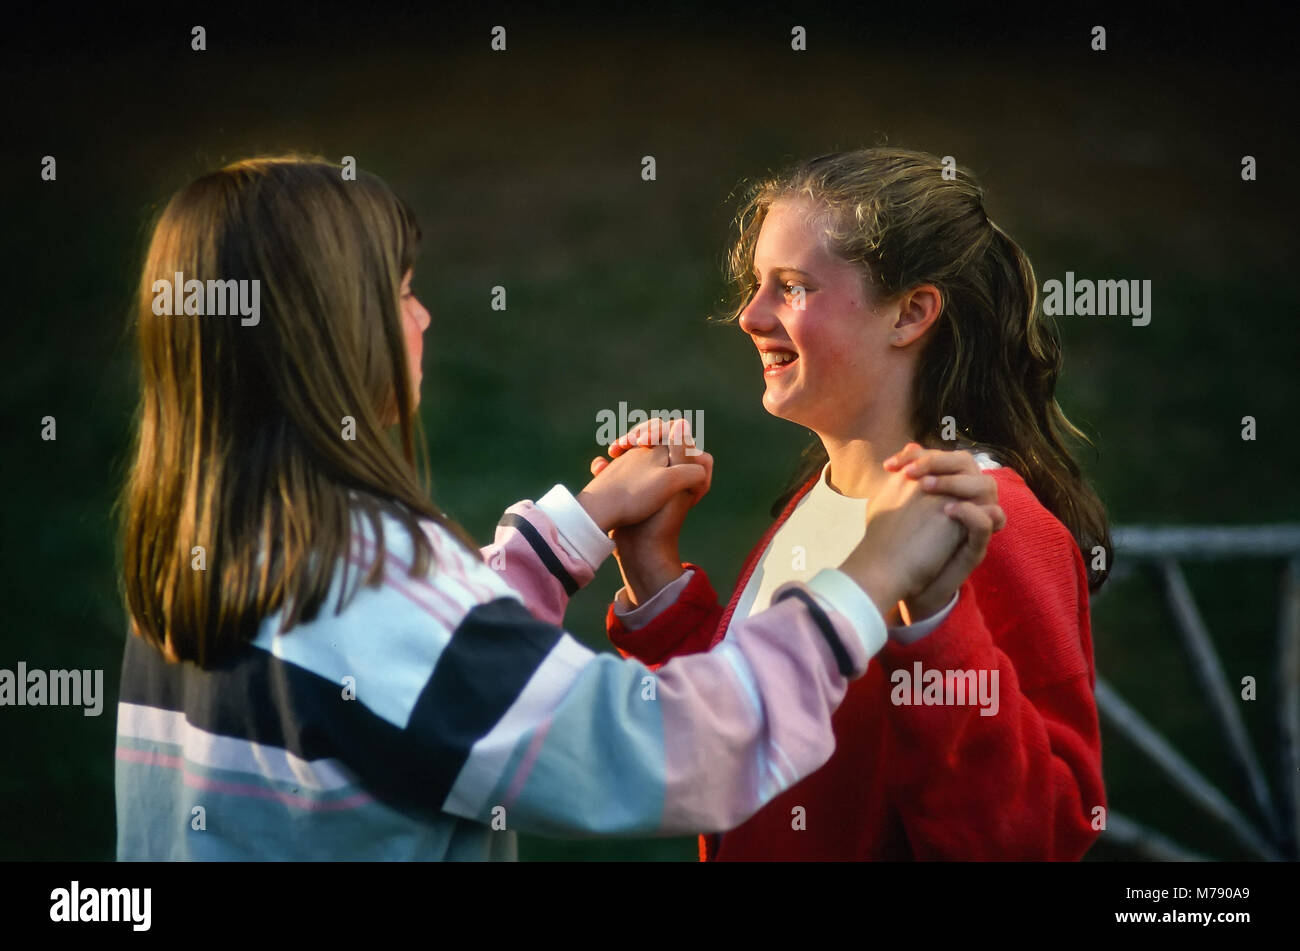 Two happy girl children hold hands at summer camp in Vermont, United States, North America. Stock Photo